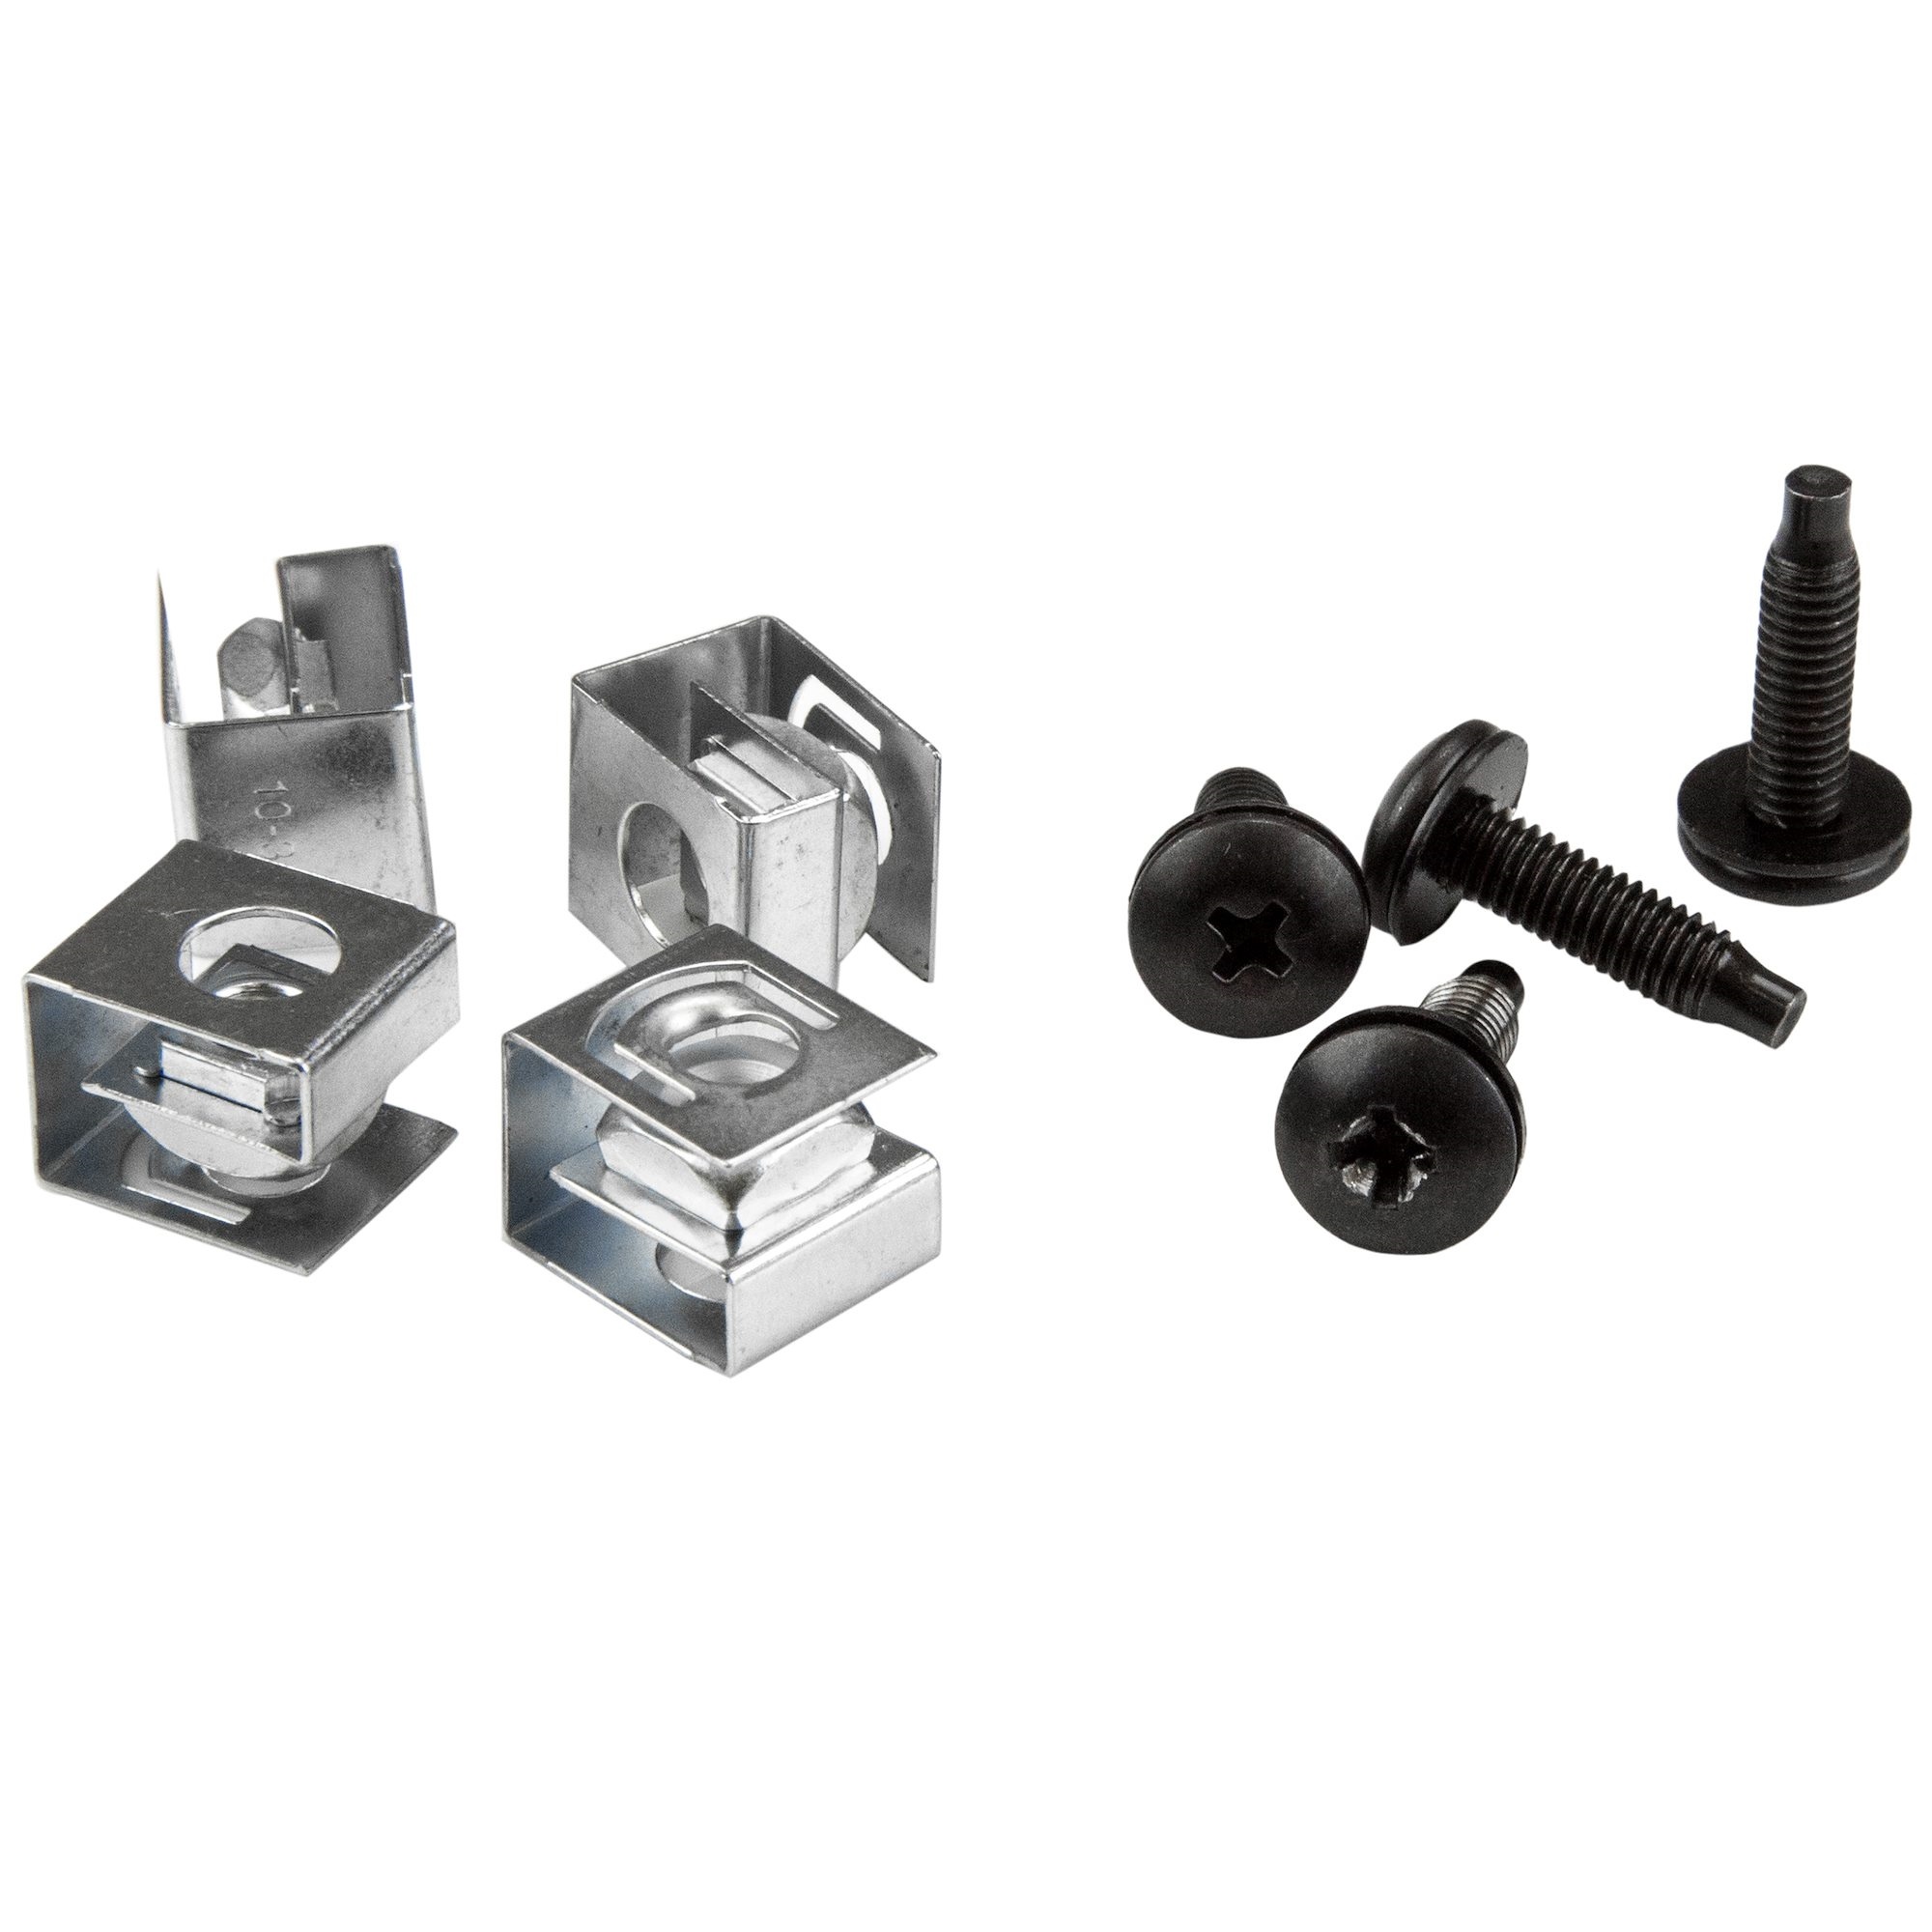 StarTech 10-32 Server Rack Screws and Clip Nuts